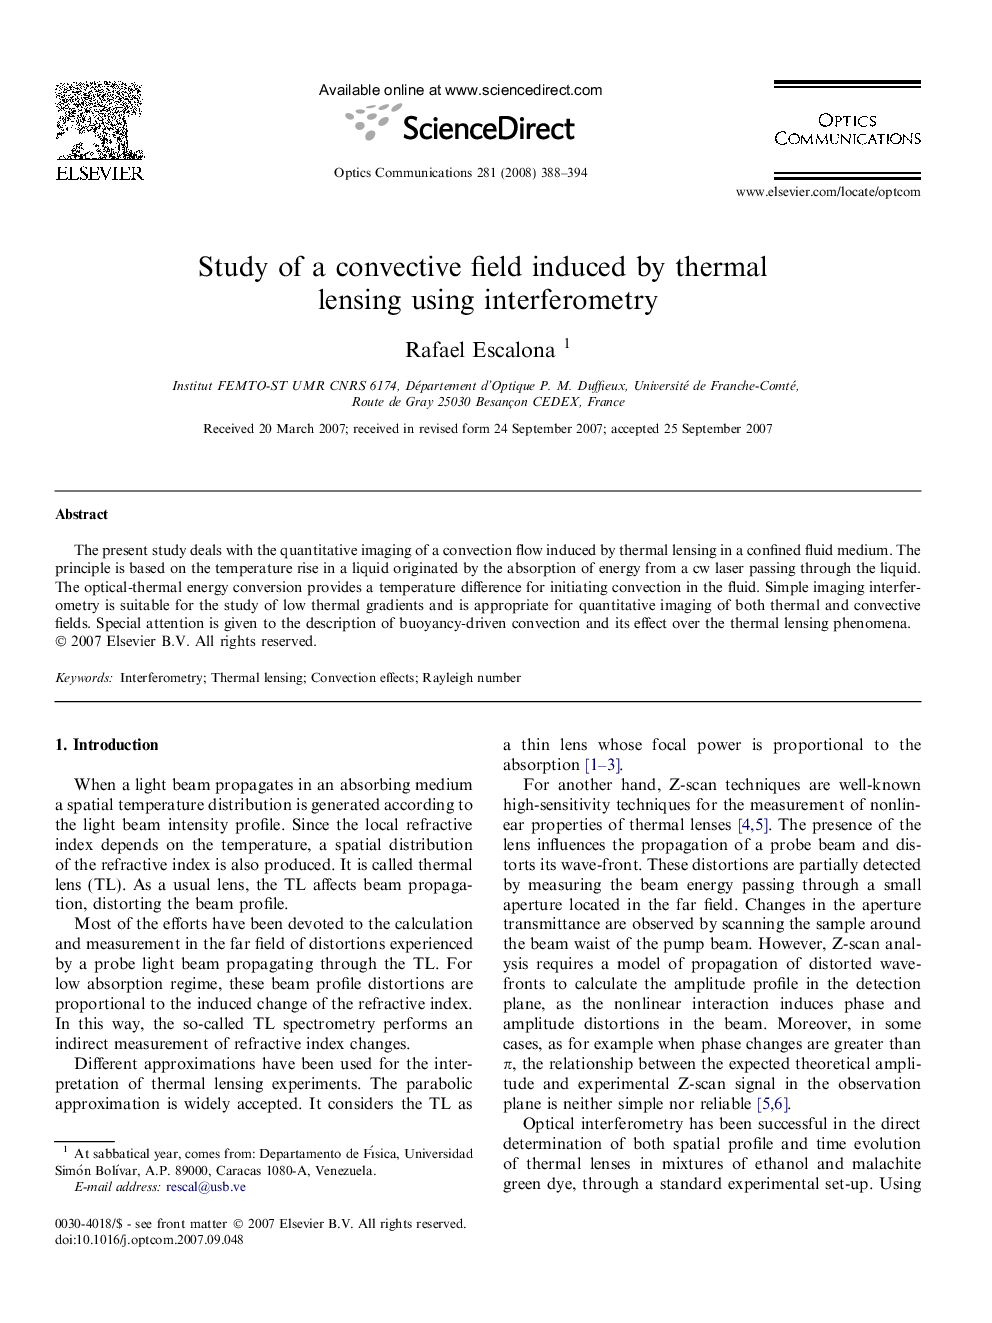 Study of a convective field induced by thermal lensing using interferometry